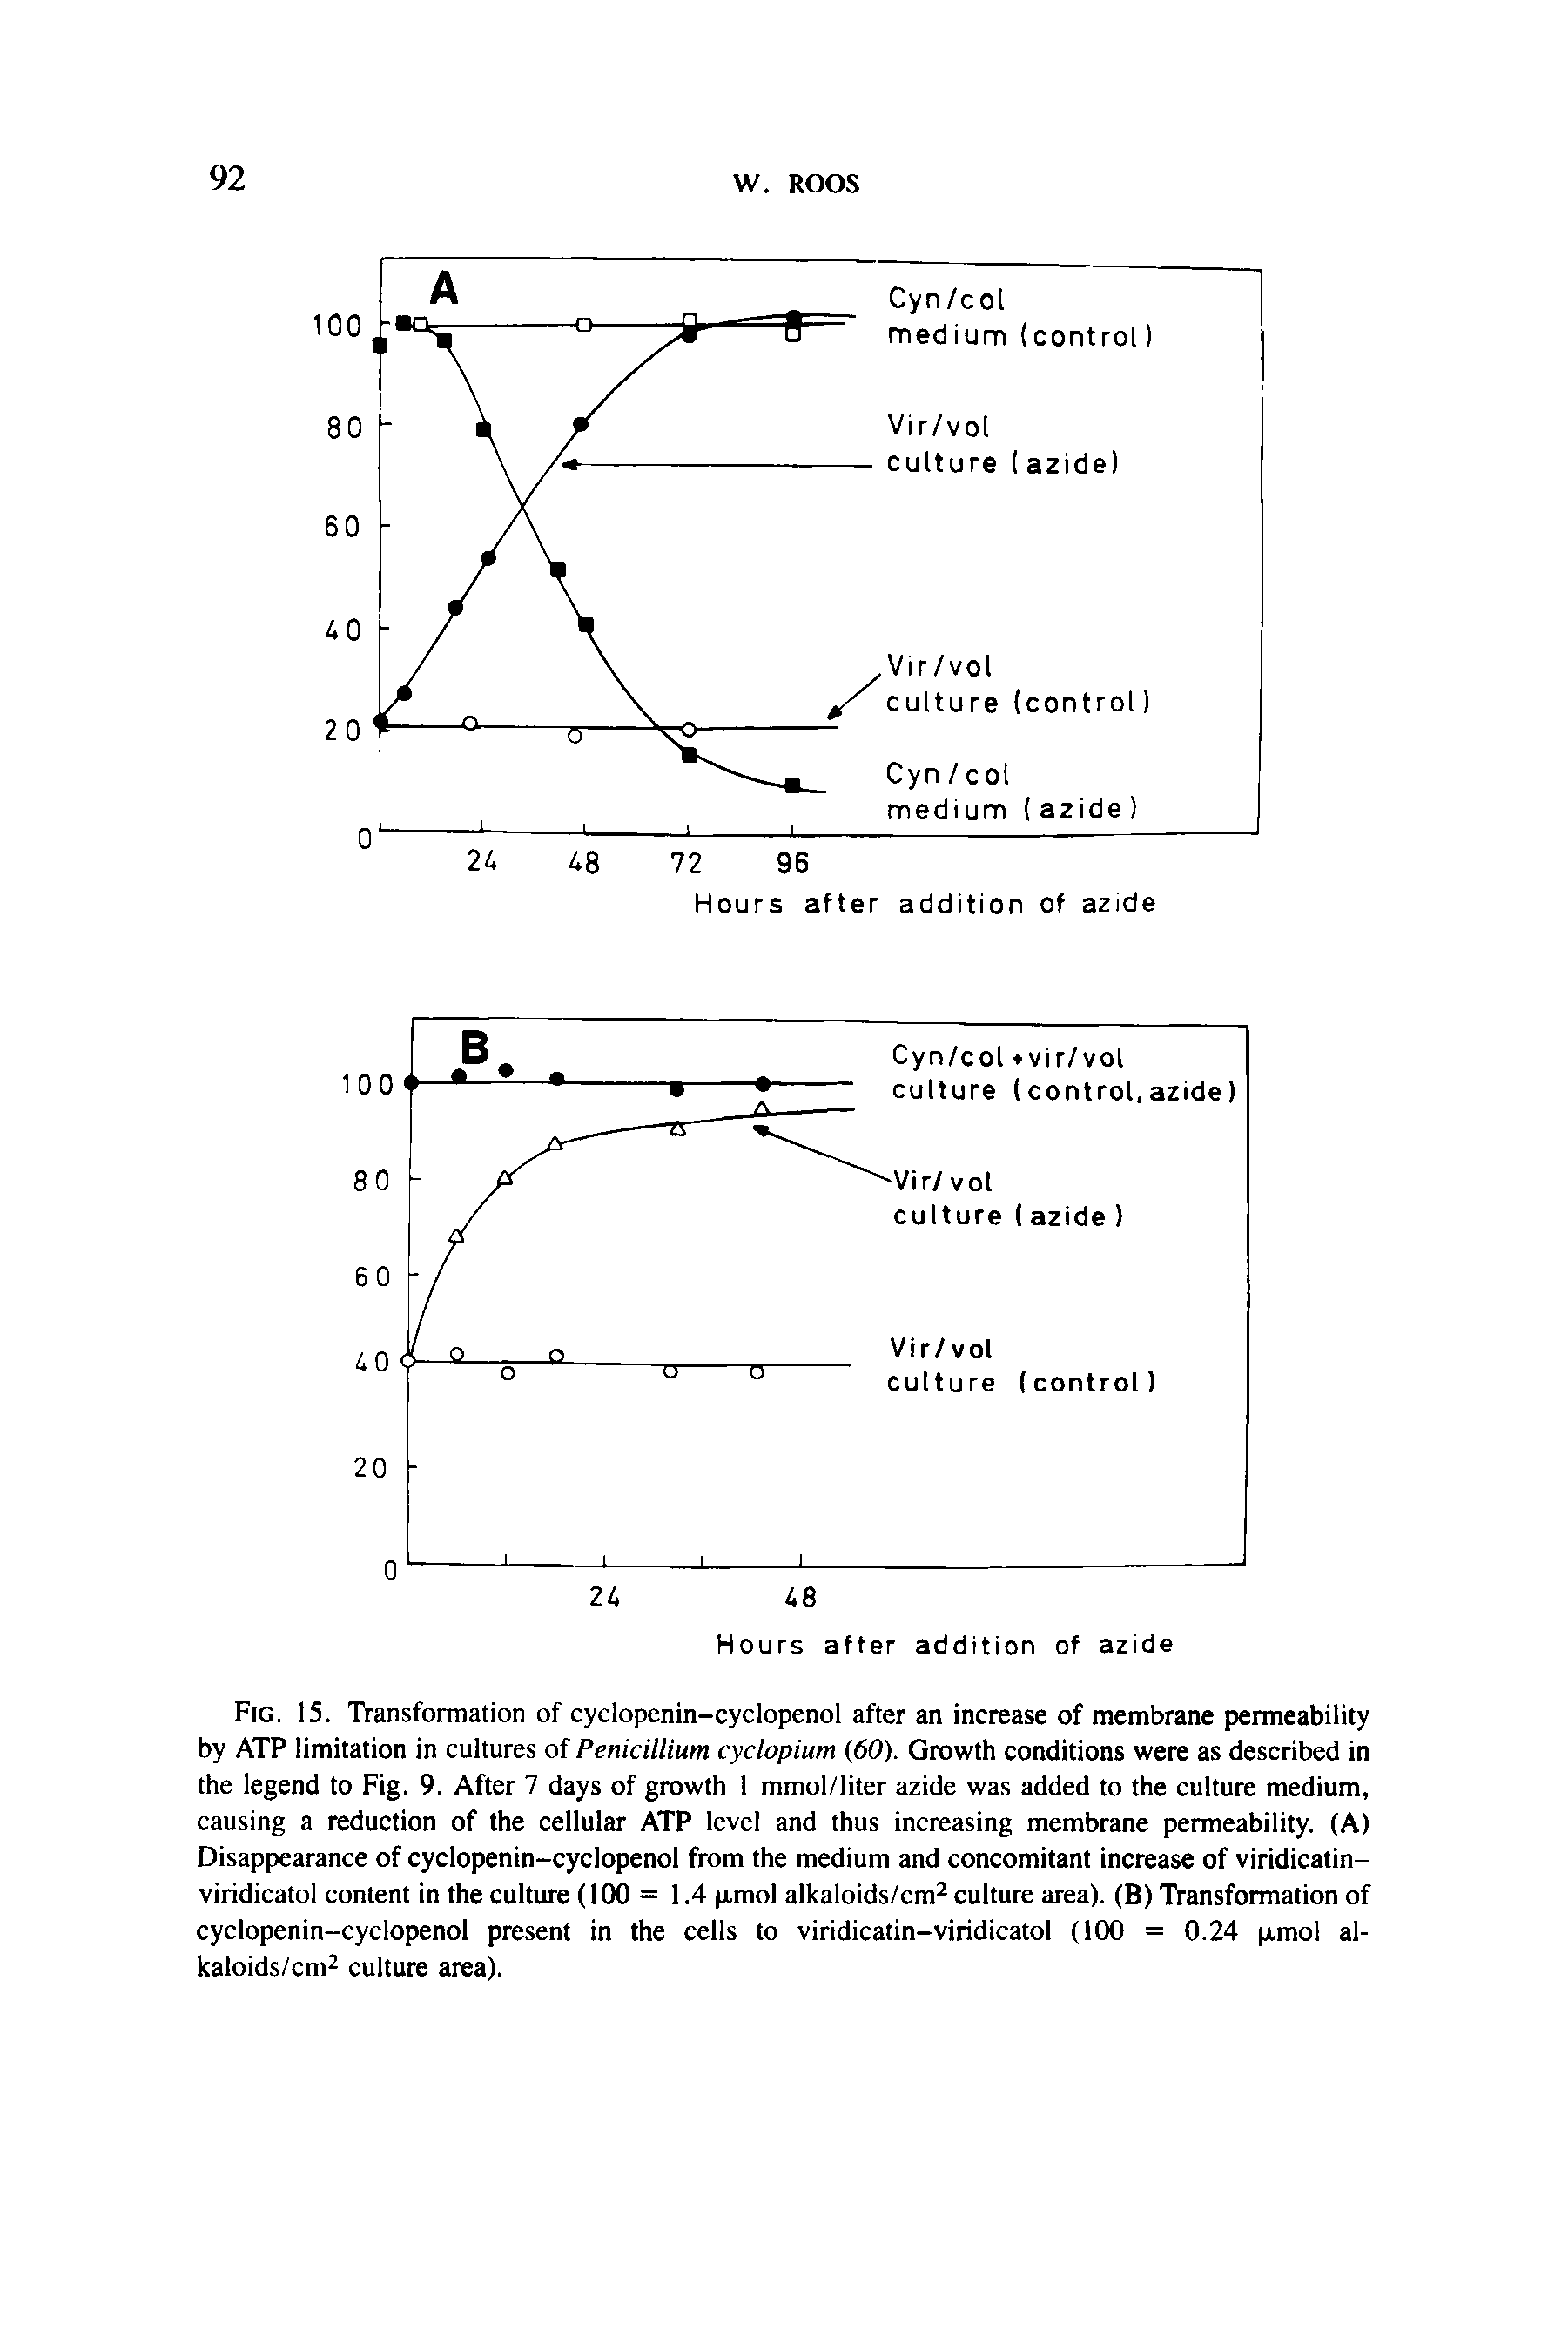 Fig. 15. Transformation of cyclopenin-cyclopenol after an increase of membrane permeability by ATP limitation in cultures of Penicillium cyclopium (60). Growth conditions were as described in the legend to Fig. 9. After 7 days of growth 1 mmol/liter azide was added to the culture medium, causing a reduction of the cellular ATP level and thus increasing membrane permeability. (A) Disappearance of cyclopenin-cyclopenol from the medium and concomitant increase of viridicatin-viridicatol content in the culture (100= 1.4 (jrmol alkaloids/cm culture area). (B) Transformation of cyclopenin-cyclopenol present in the cells to viridicatin-viridicatol (100 = 0.24 p.mol al-kaloids/cm culture area).